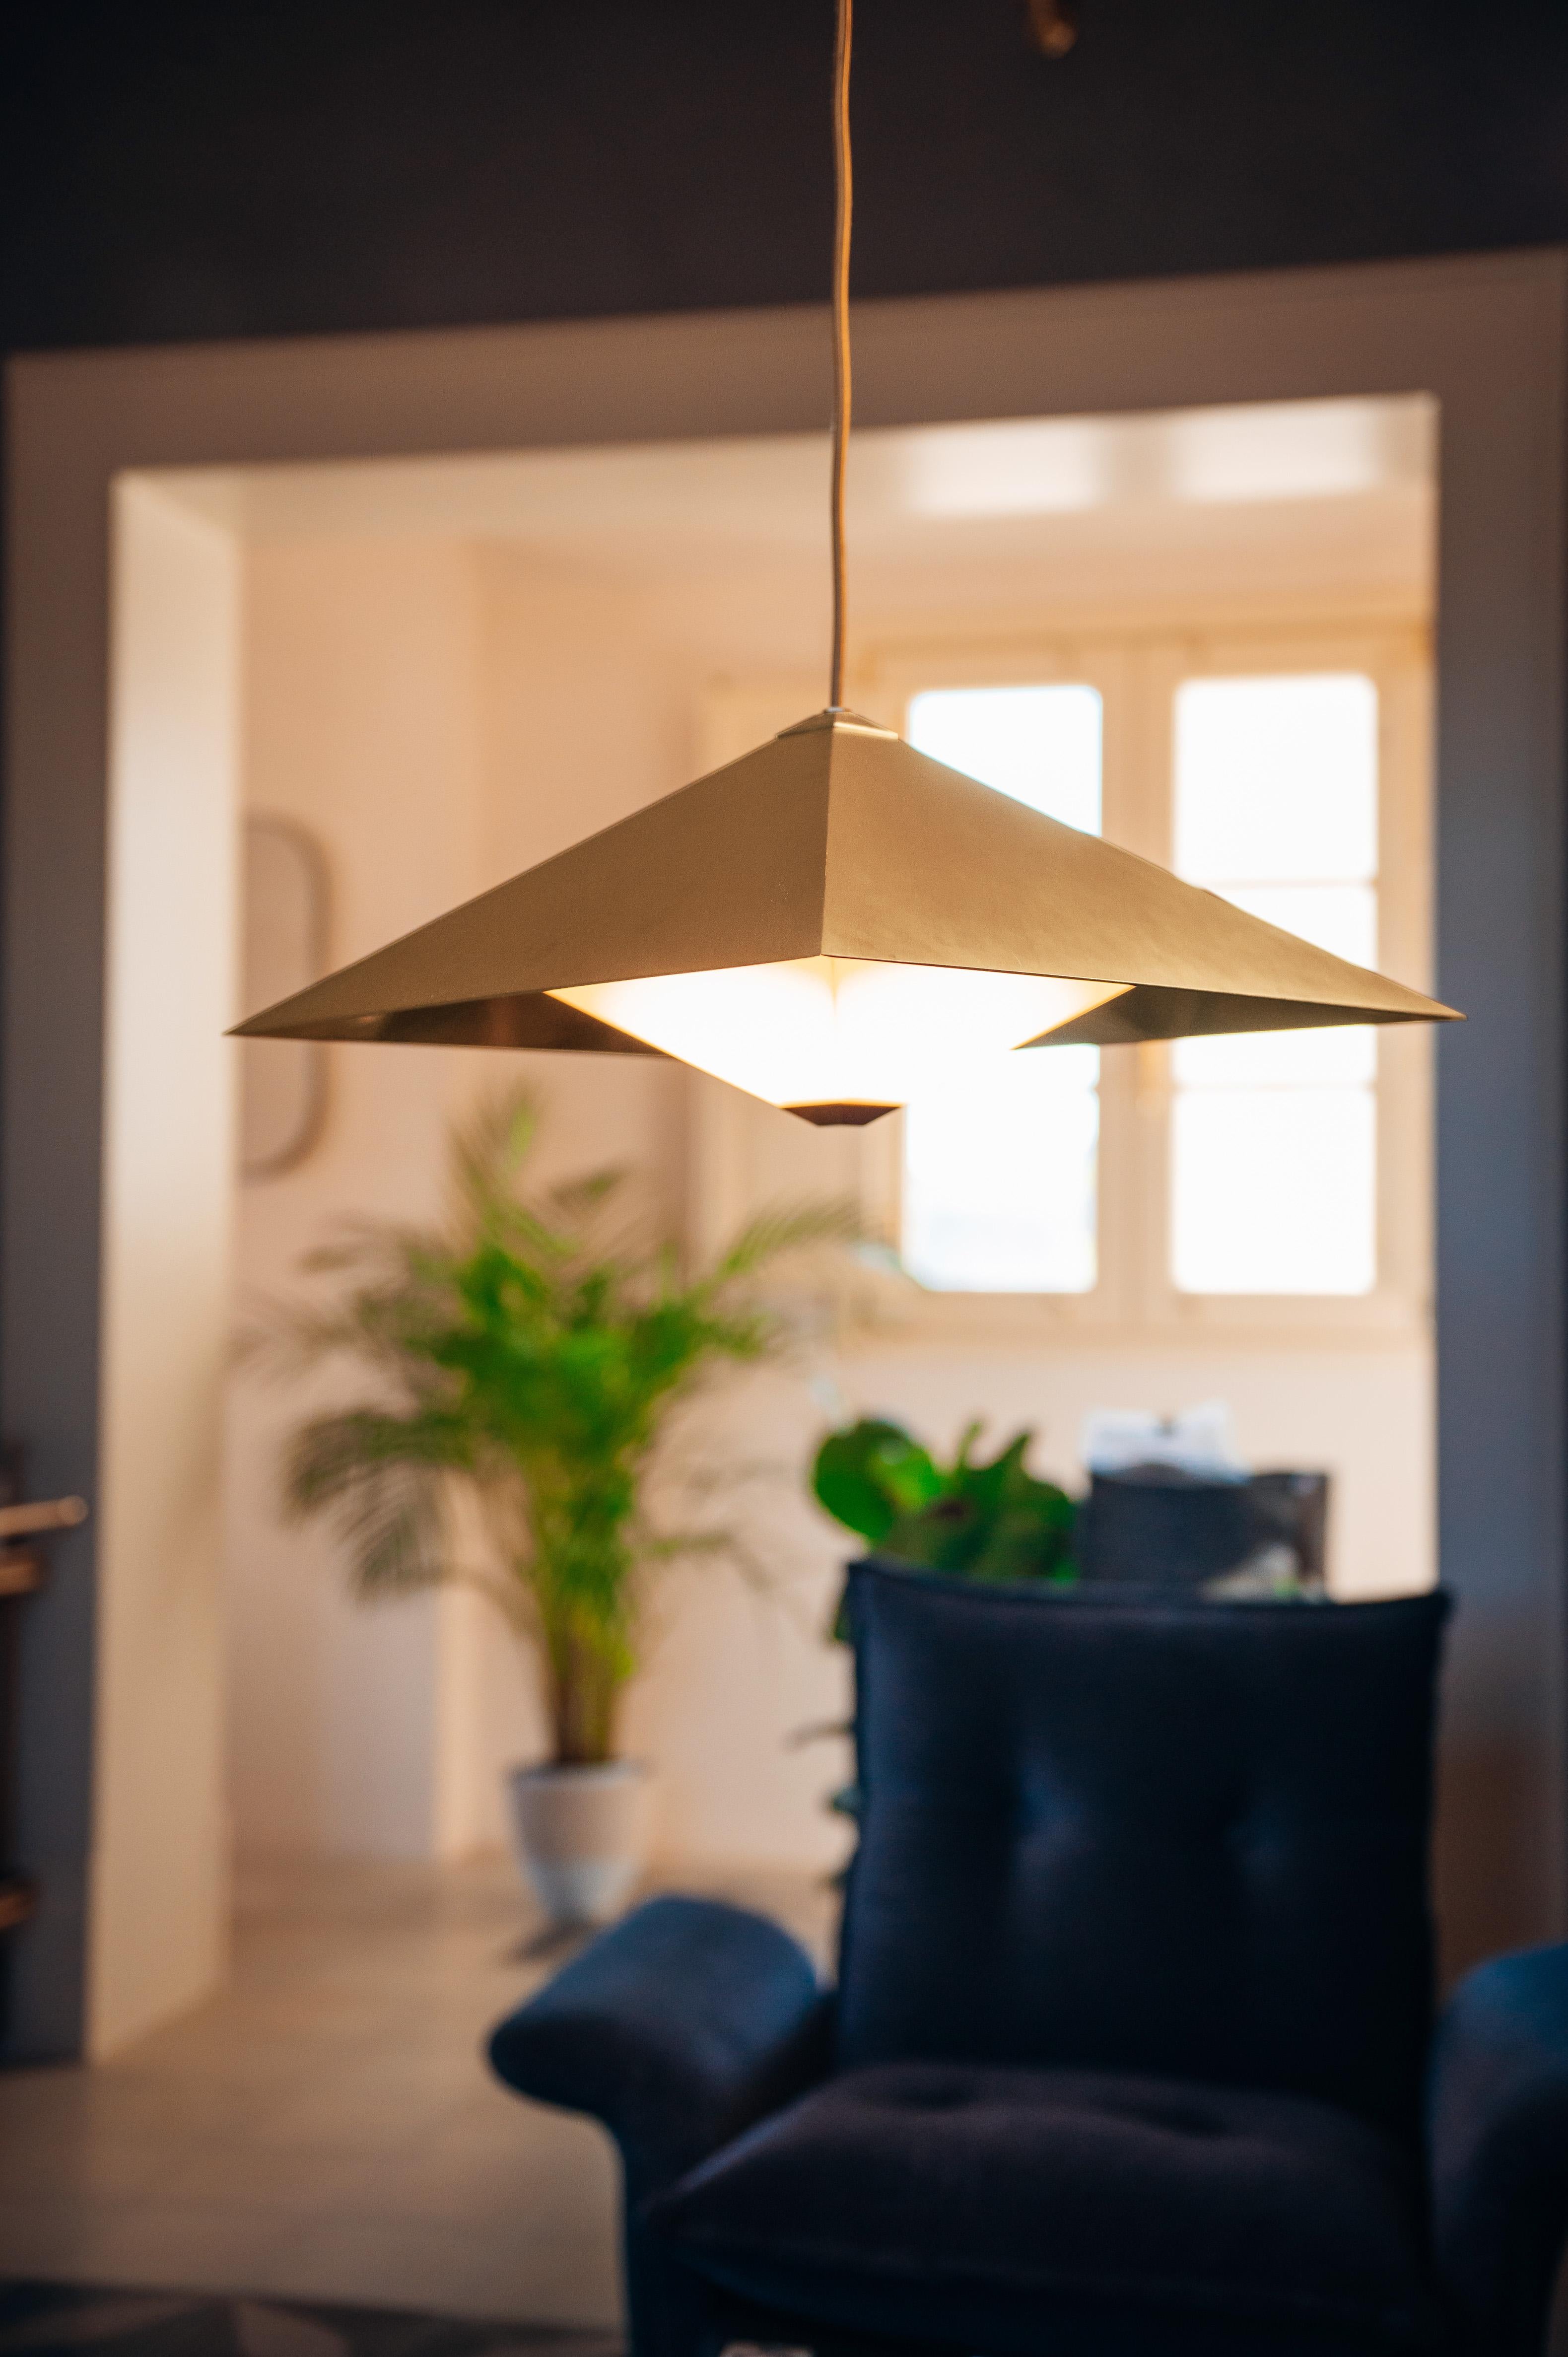 Italian Octa Pendant Lighting Brass by Diaphan Studio, Represented by Tuleste Factory For Sale